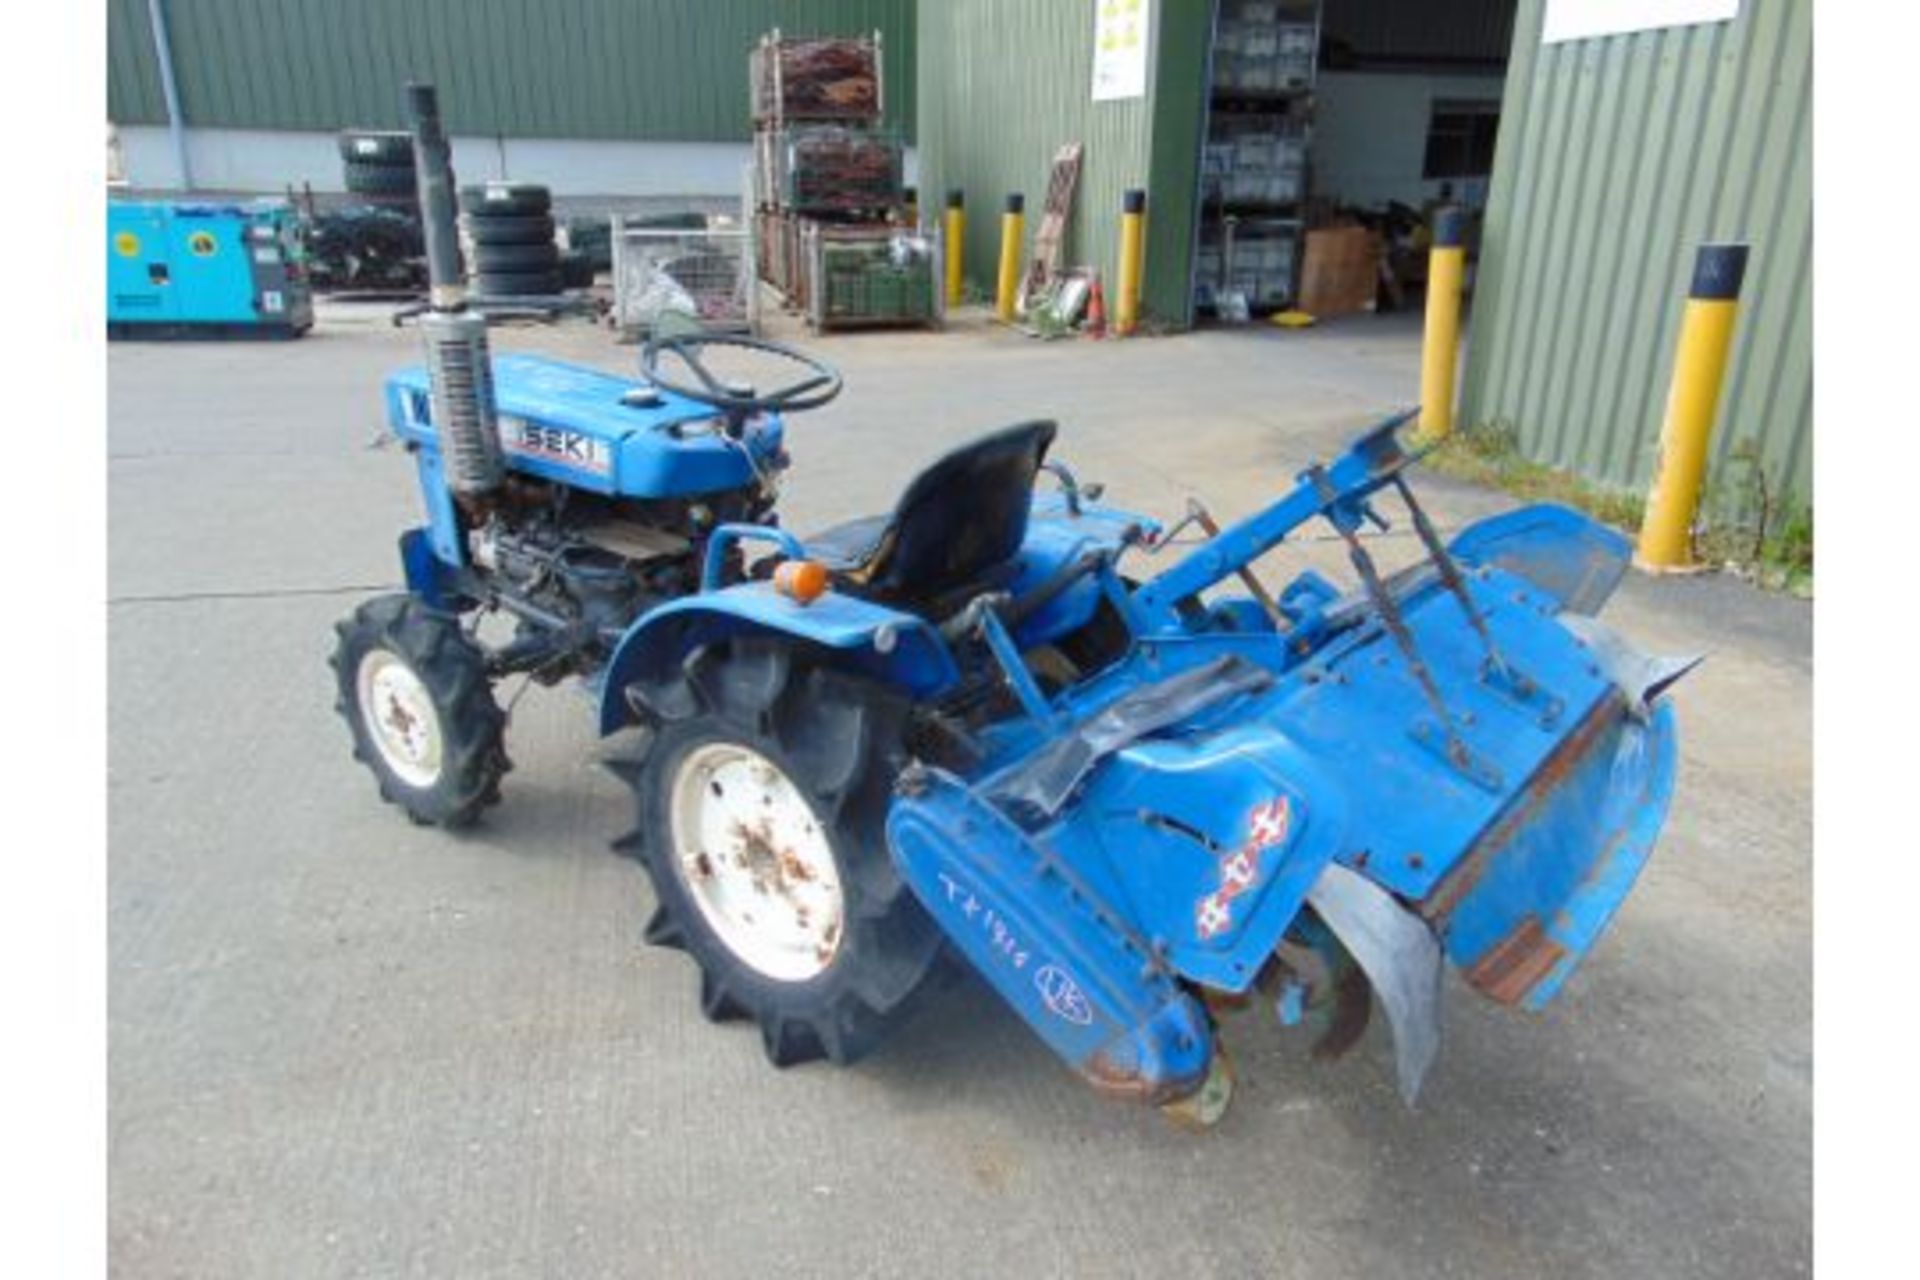 Iseki TX1410 4x4 Compact Tractor w/ Rotor Tiller - Image 7 of 24